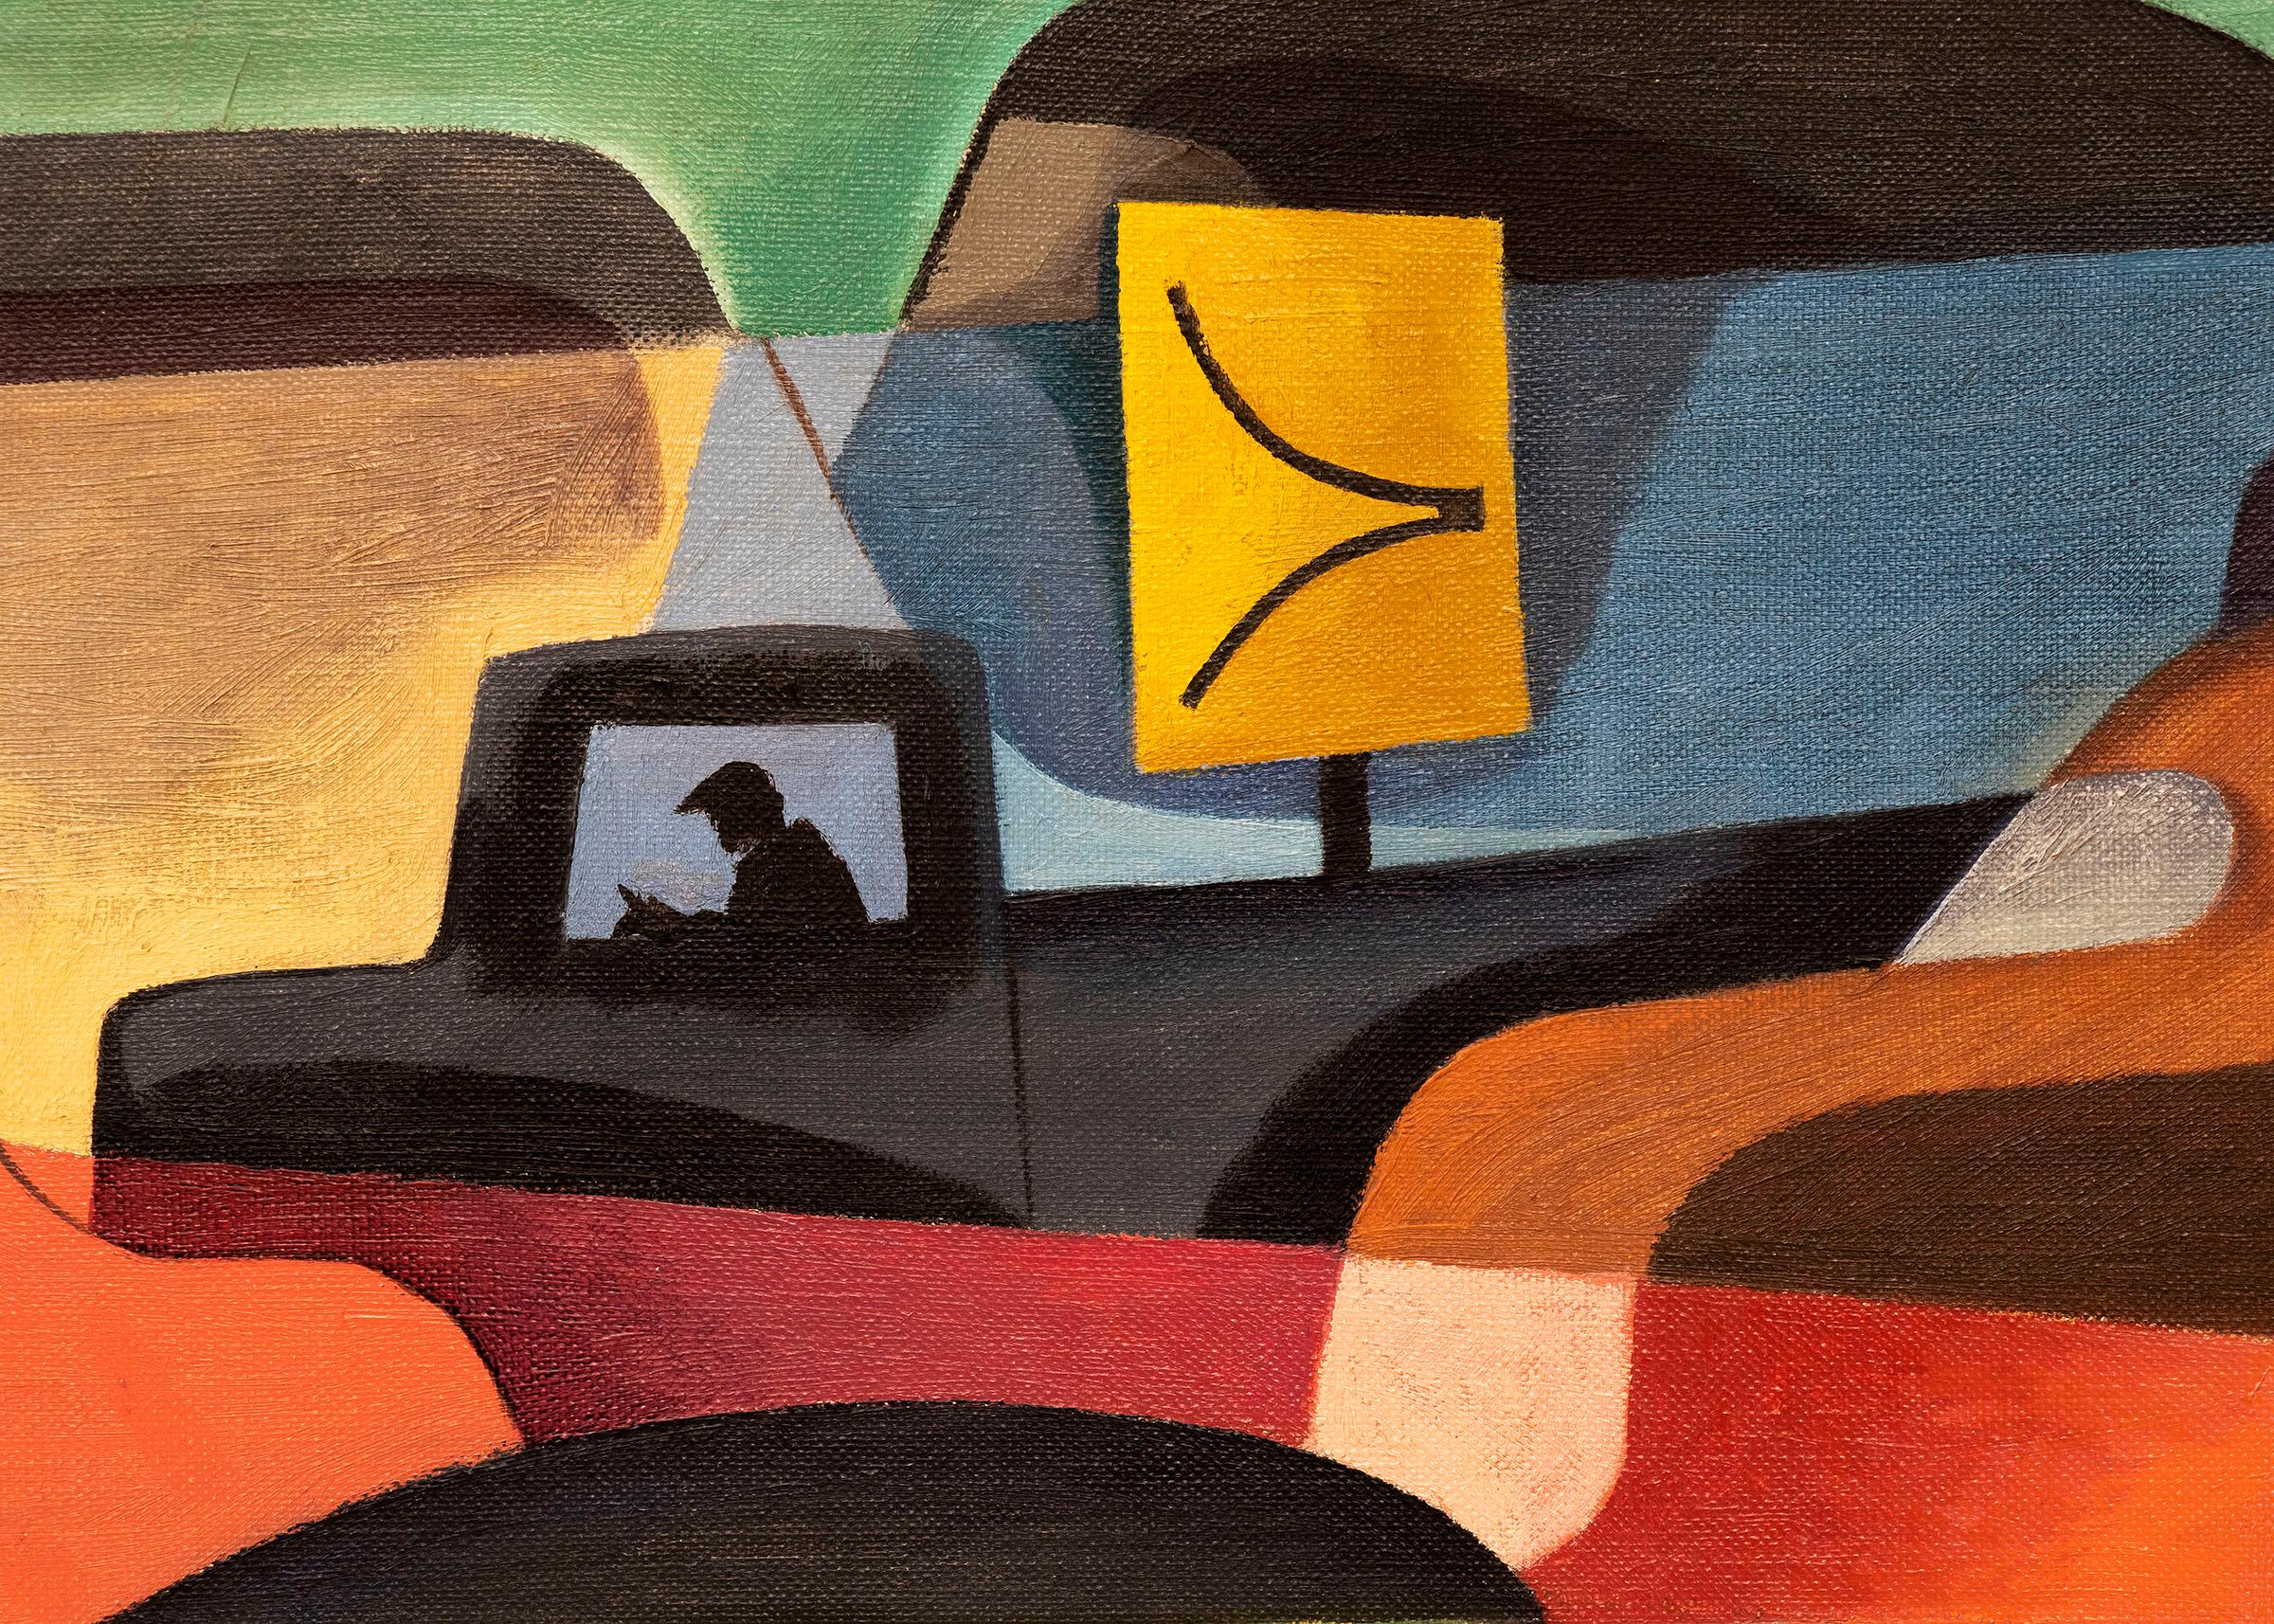 Untitled (Traffic Jam, 1950s Modernist Painting with Cars) - Black Figurative Painting by William Sanderson